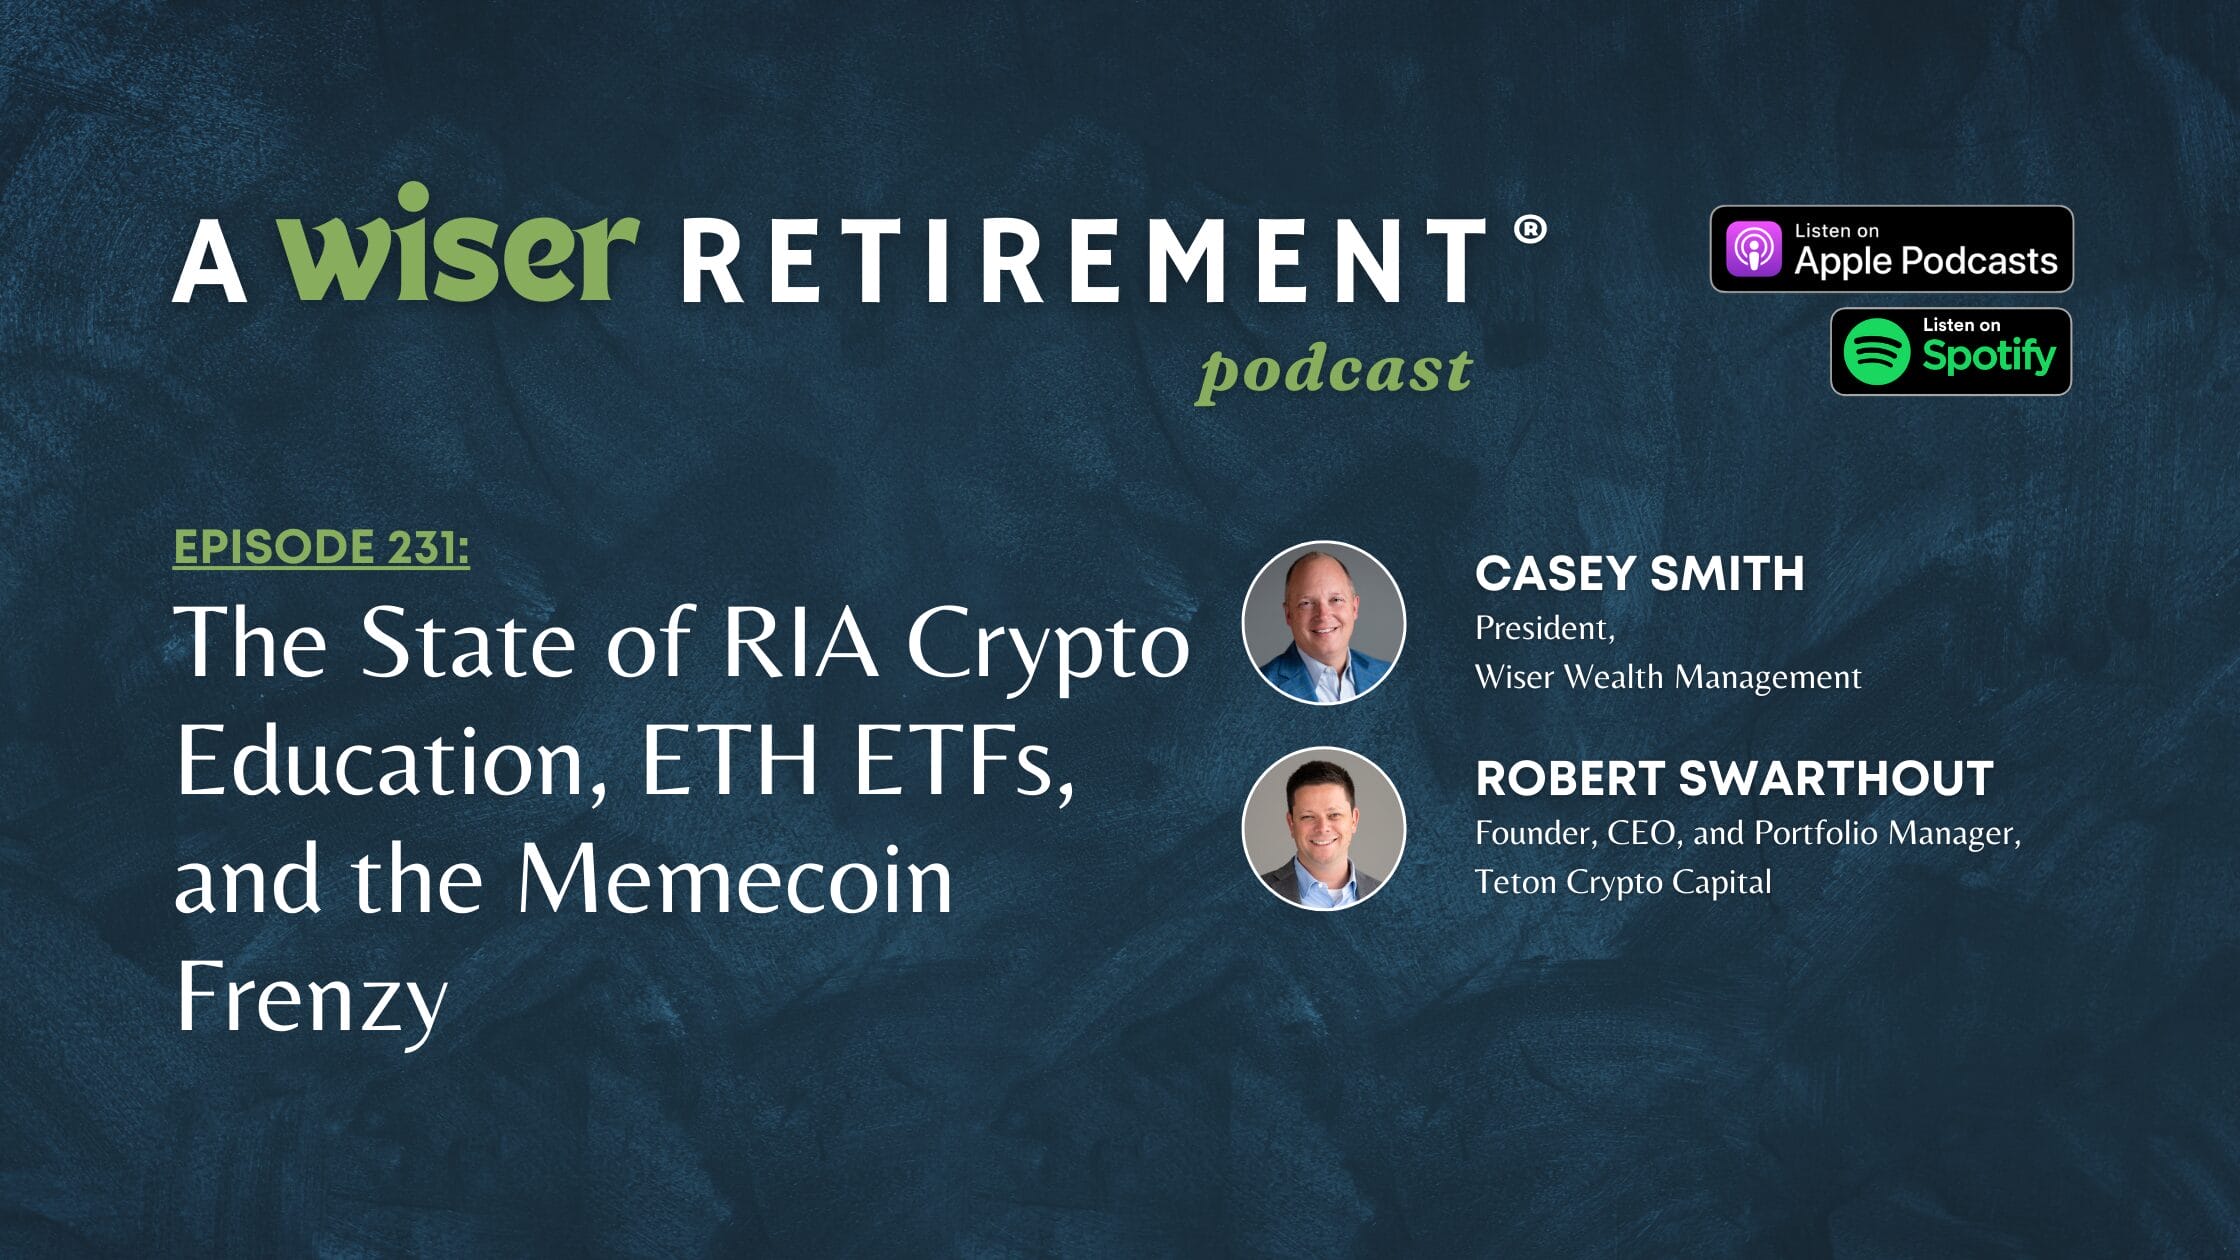 The State of RIA Crypto Education, ETH ETFs, and the Memecoin Frenzy